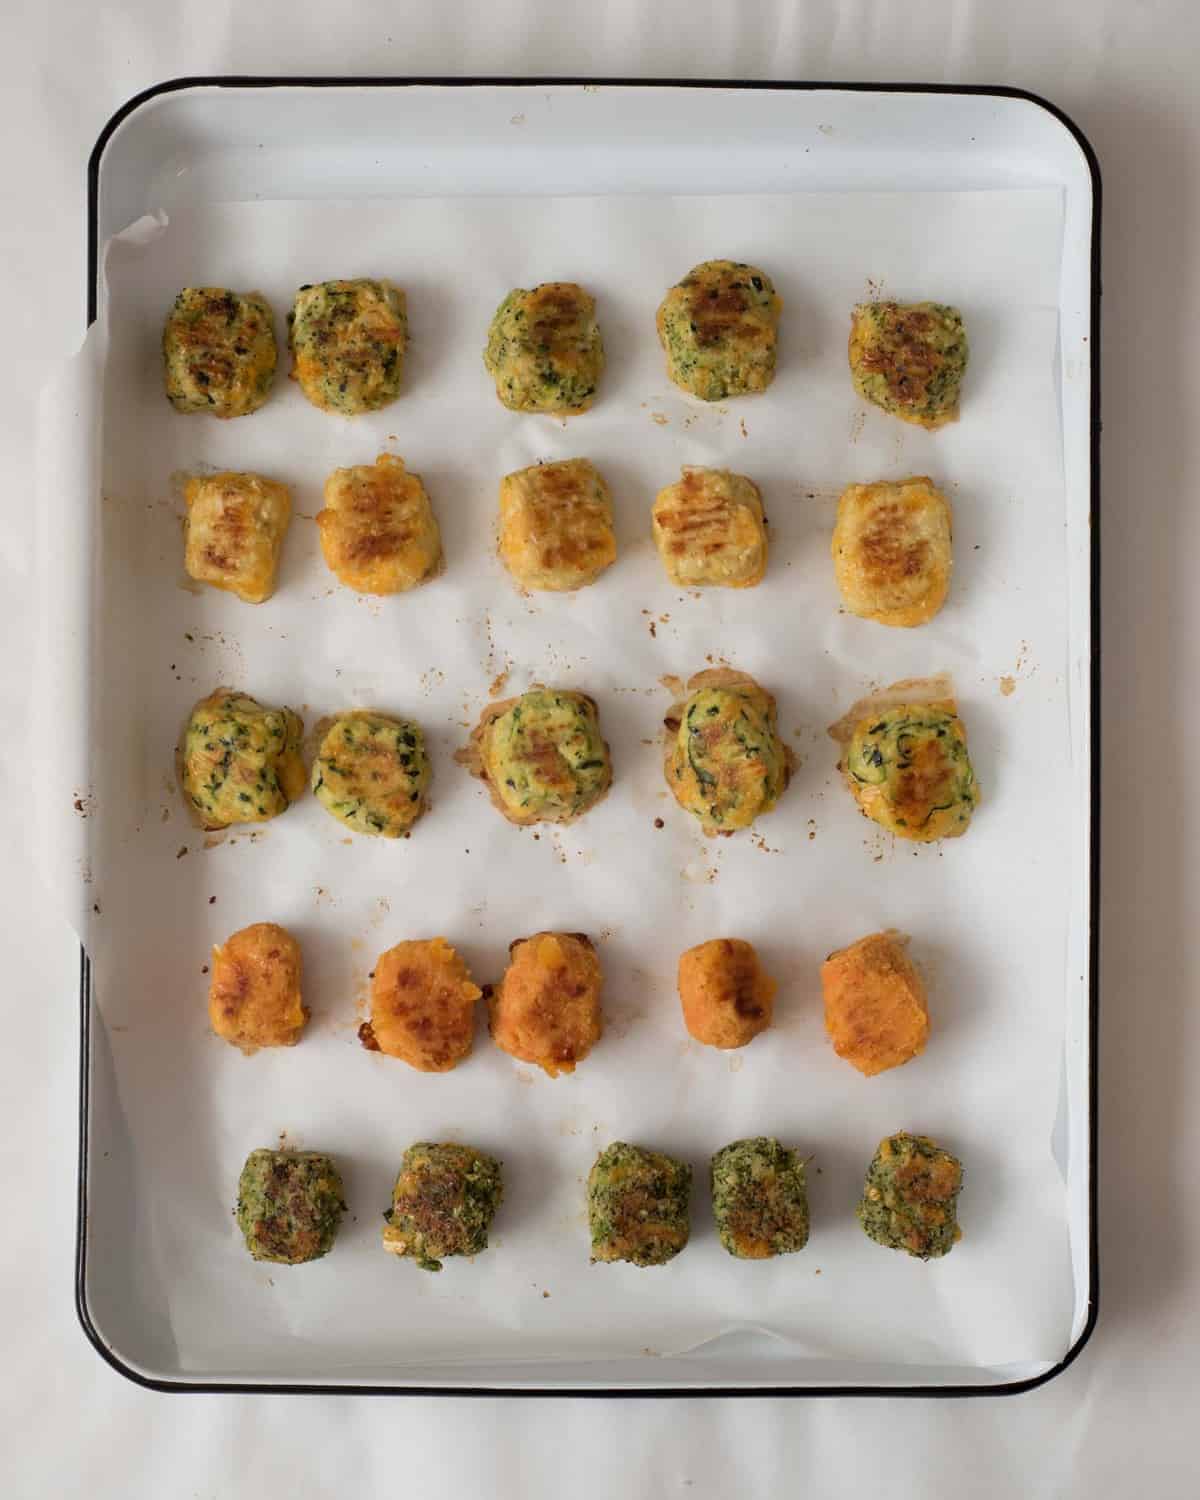 Recipes for healthy veggie tots including broccoli tots, cauli-tots, sweet potatoes tots, zucchini tots, and mixed veggie tots! Perfect for making veggies fun for kids and adults both!